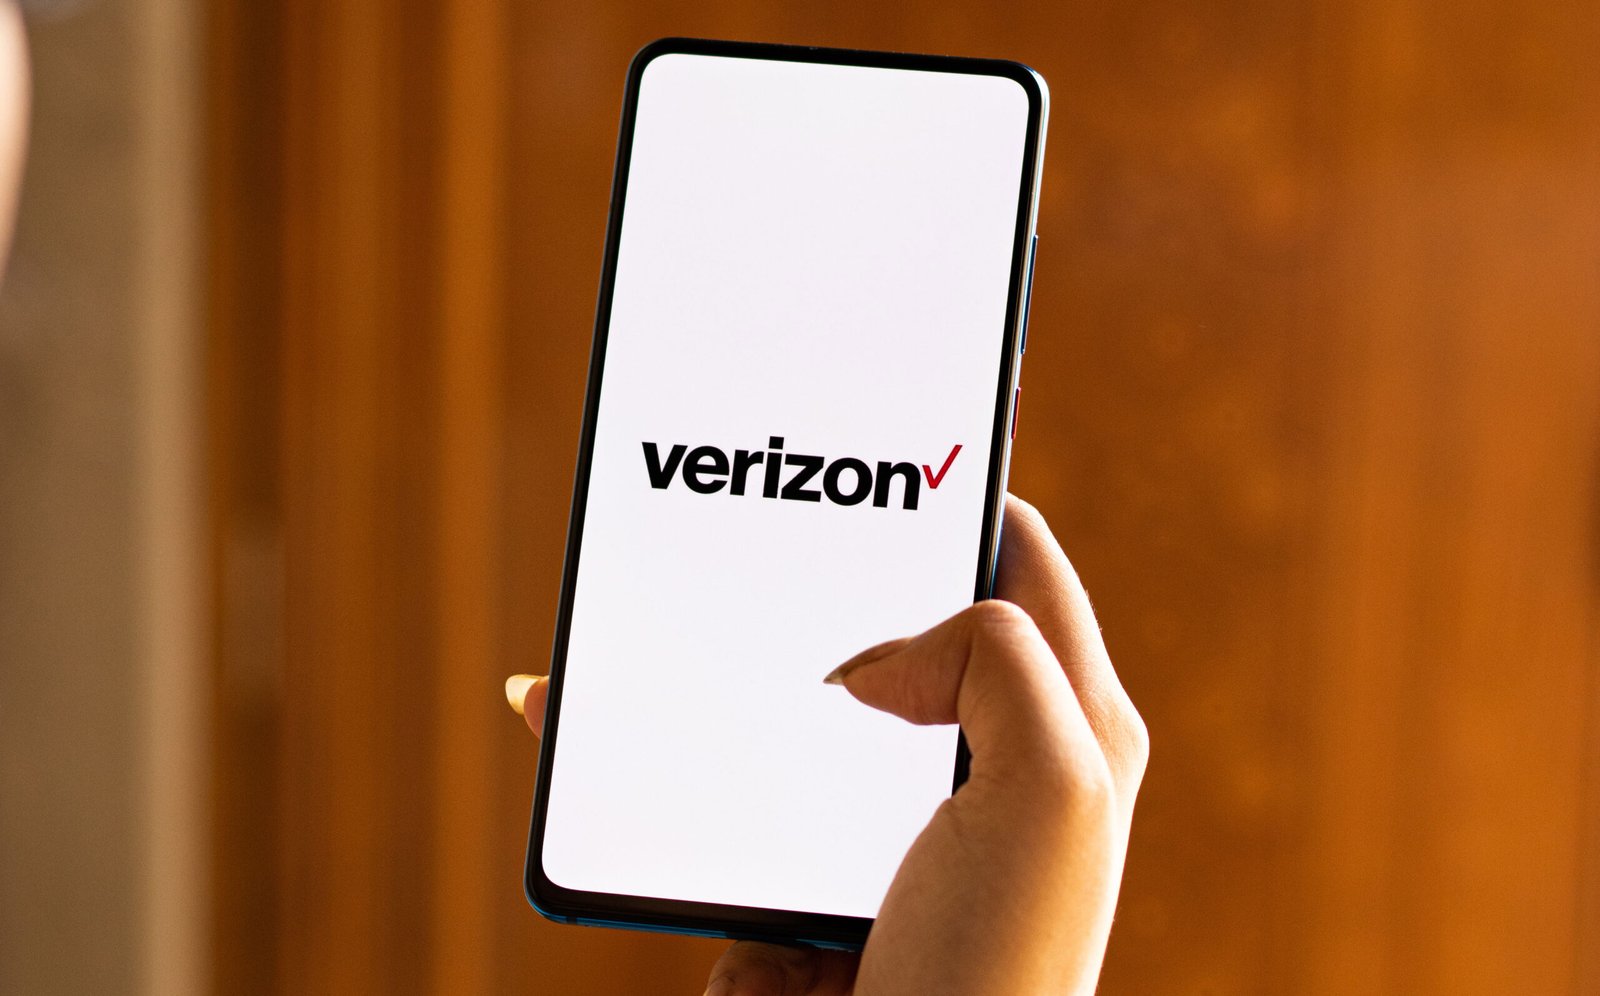 what is the difference between message and message plus on verizon